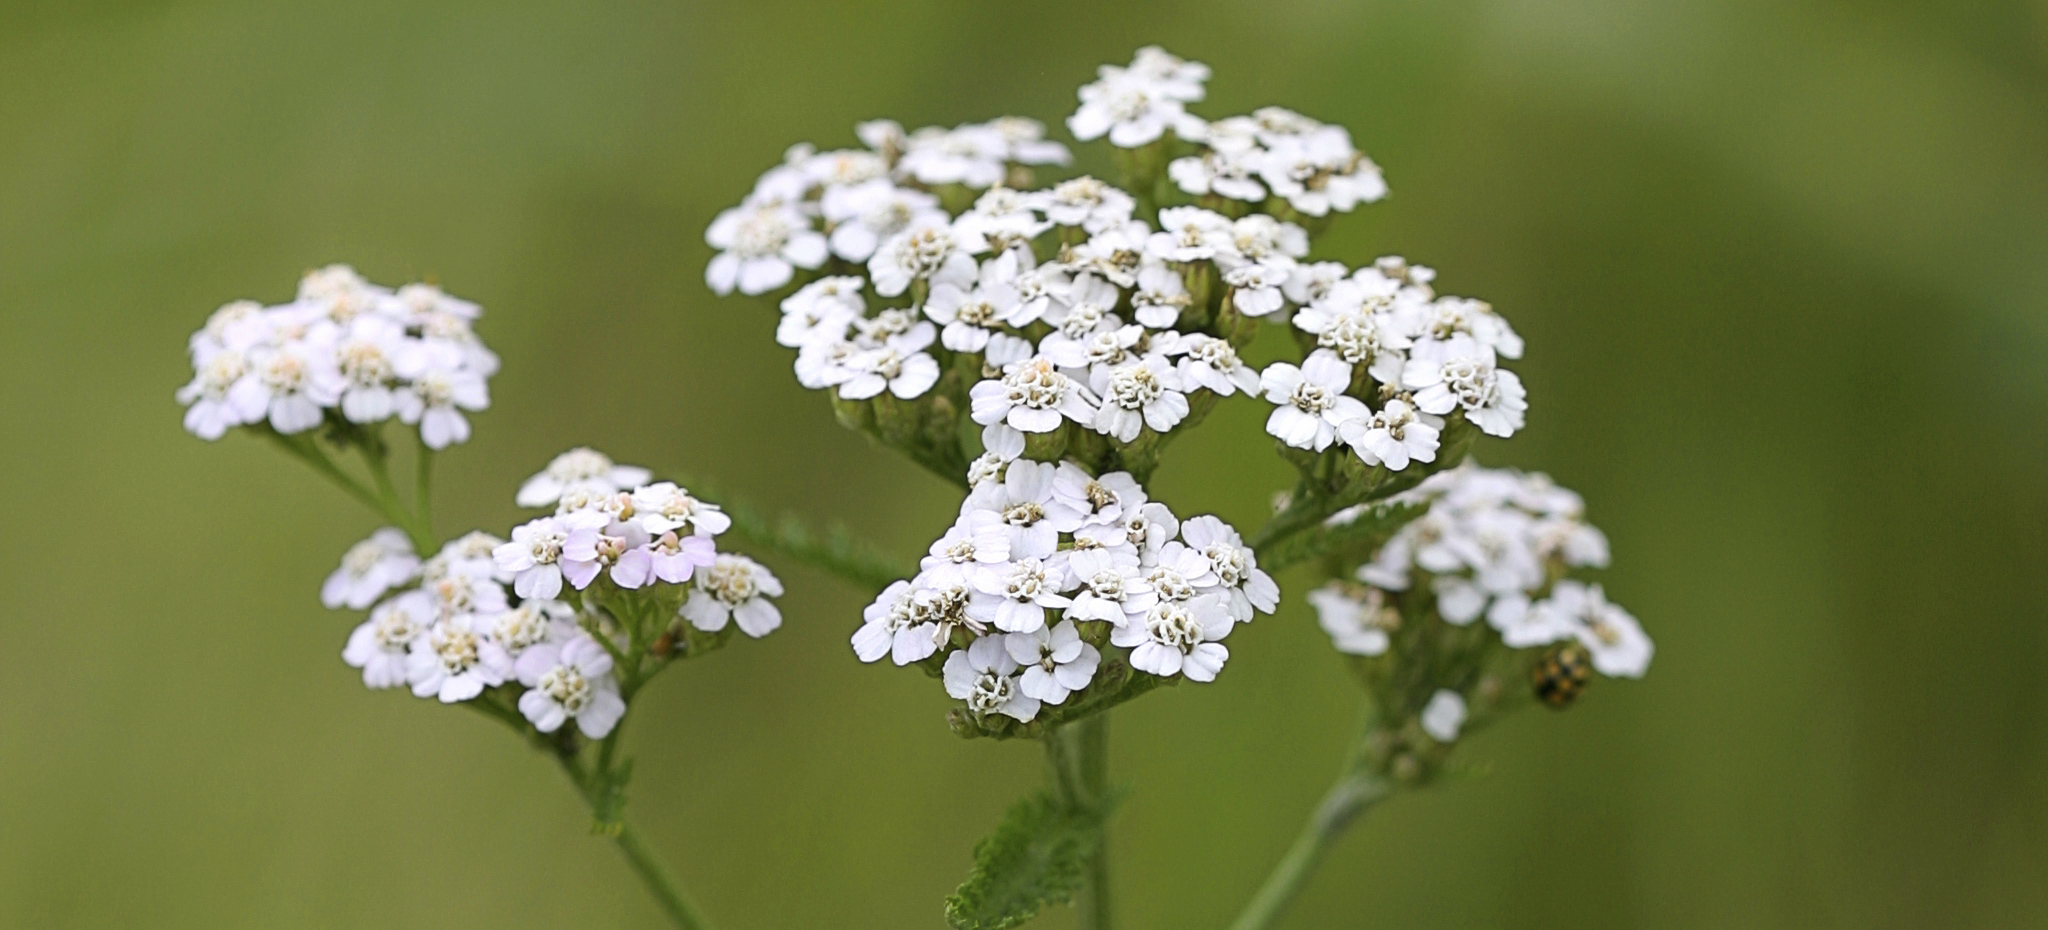 white common yarrow flowers over a blurry background of leaves